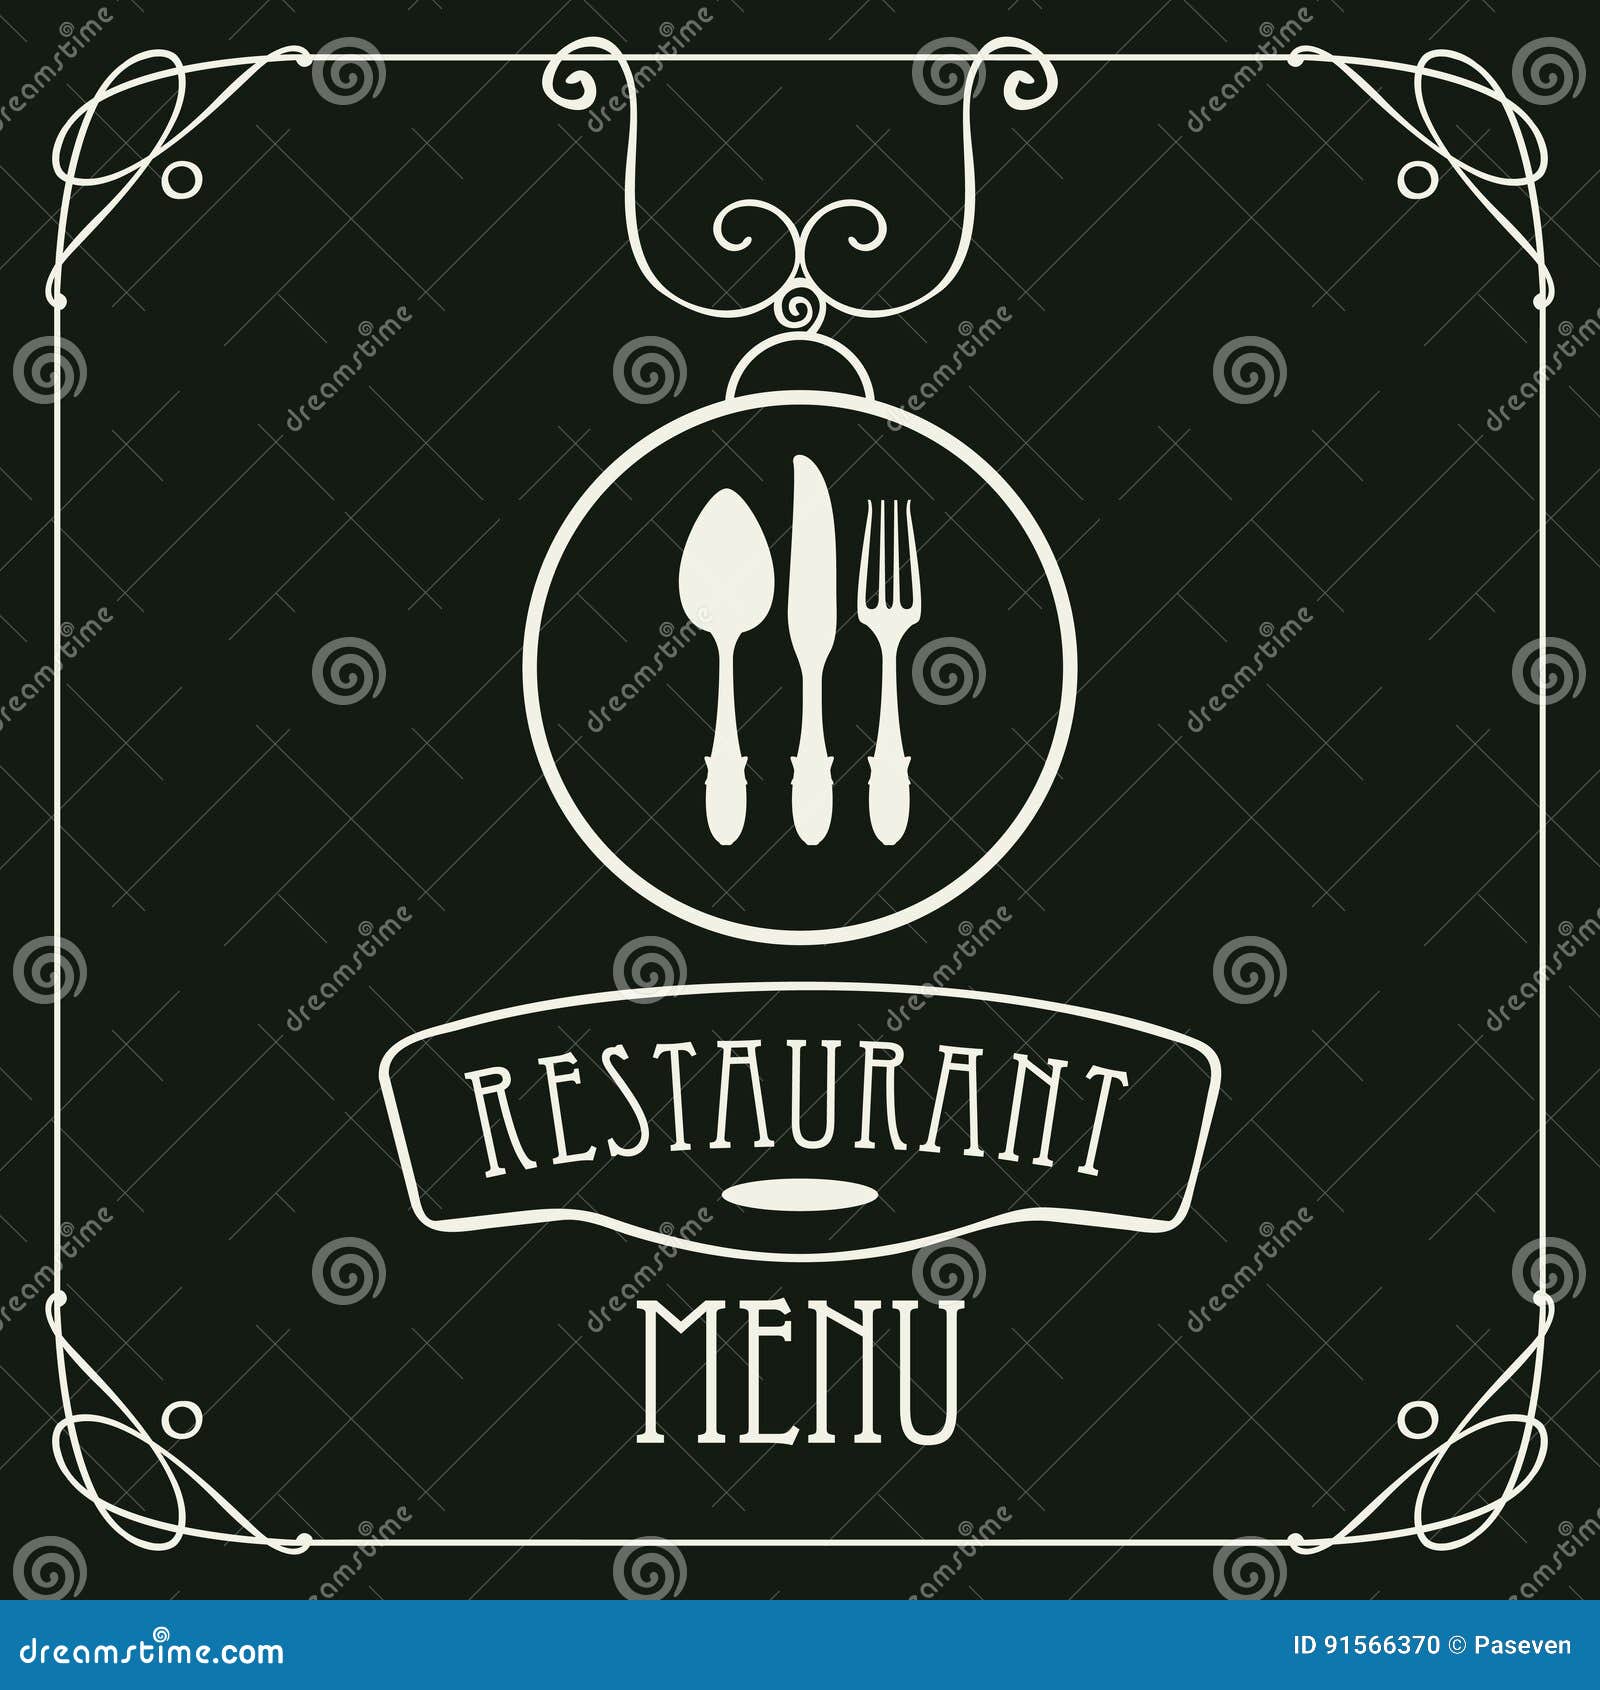 menu for restaurant with flatware and curlicues